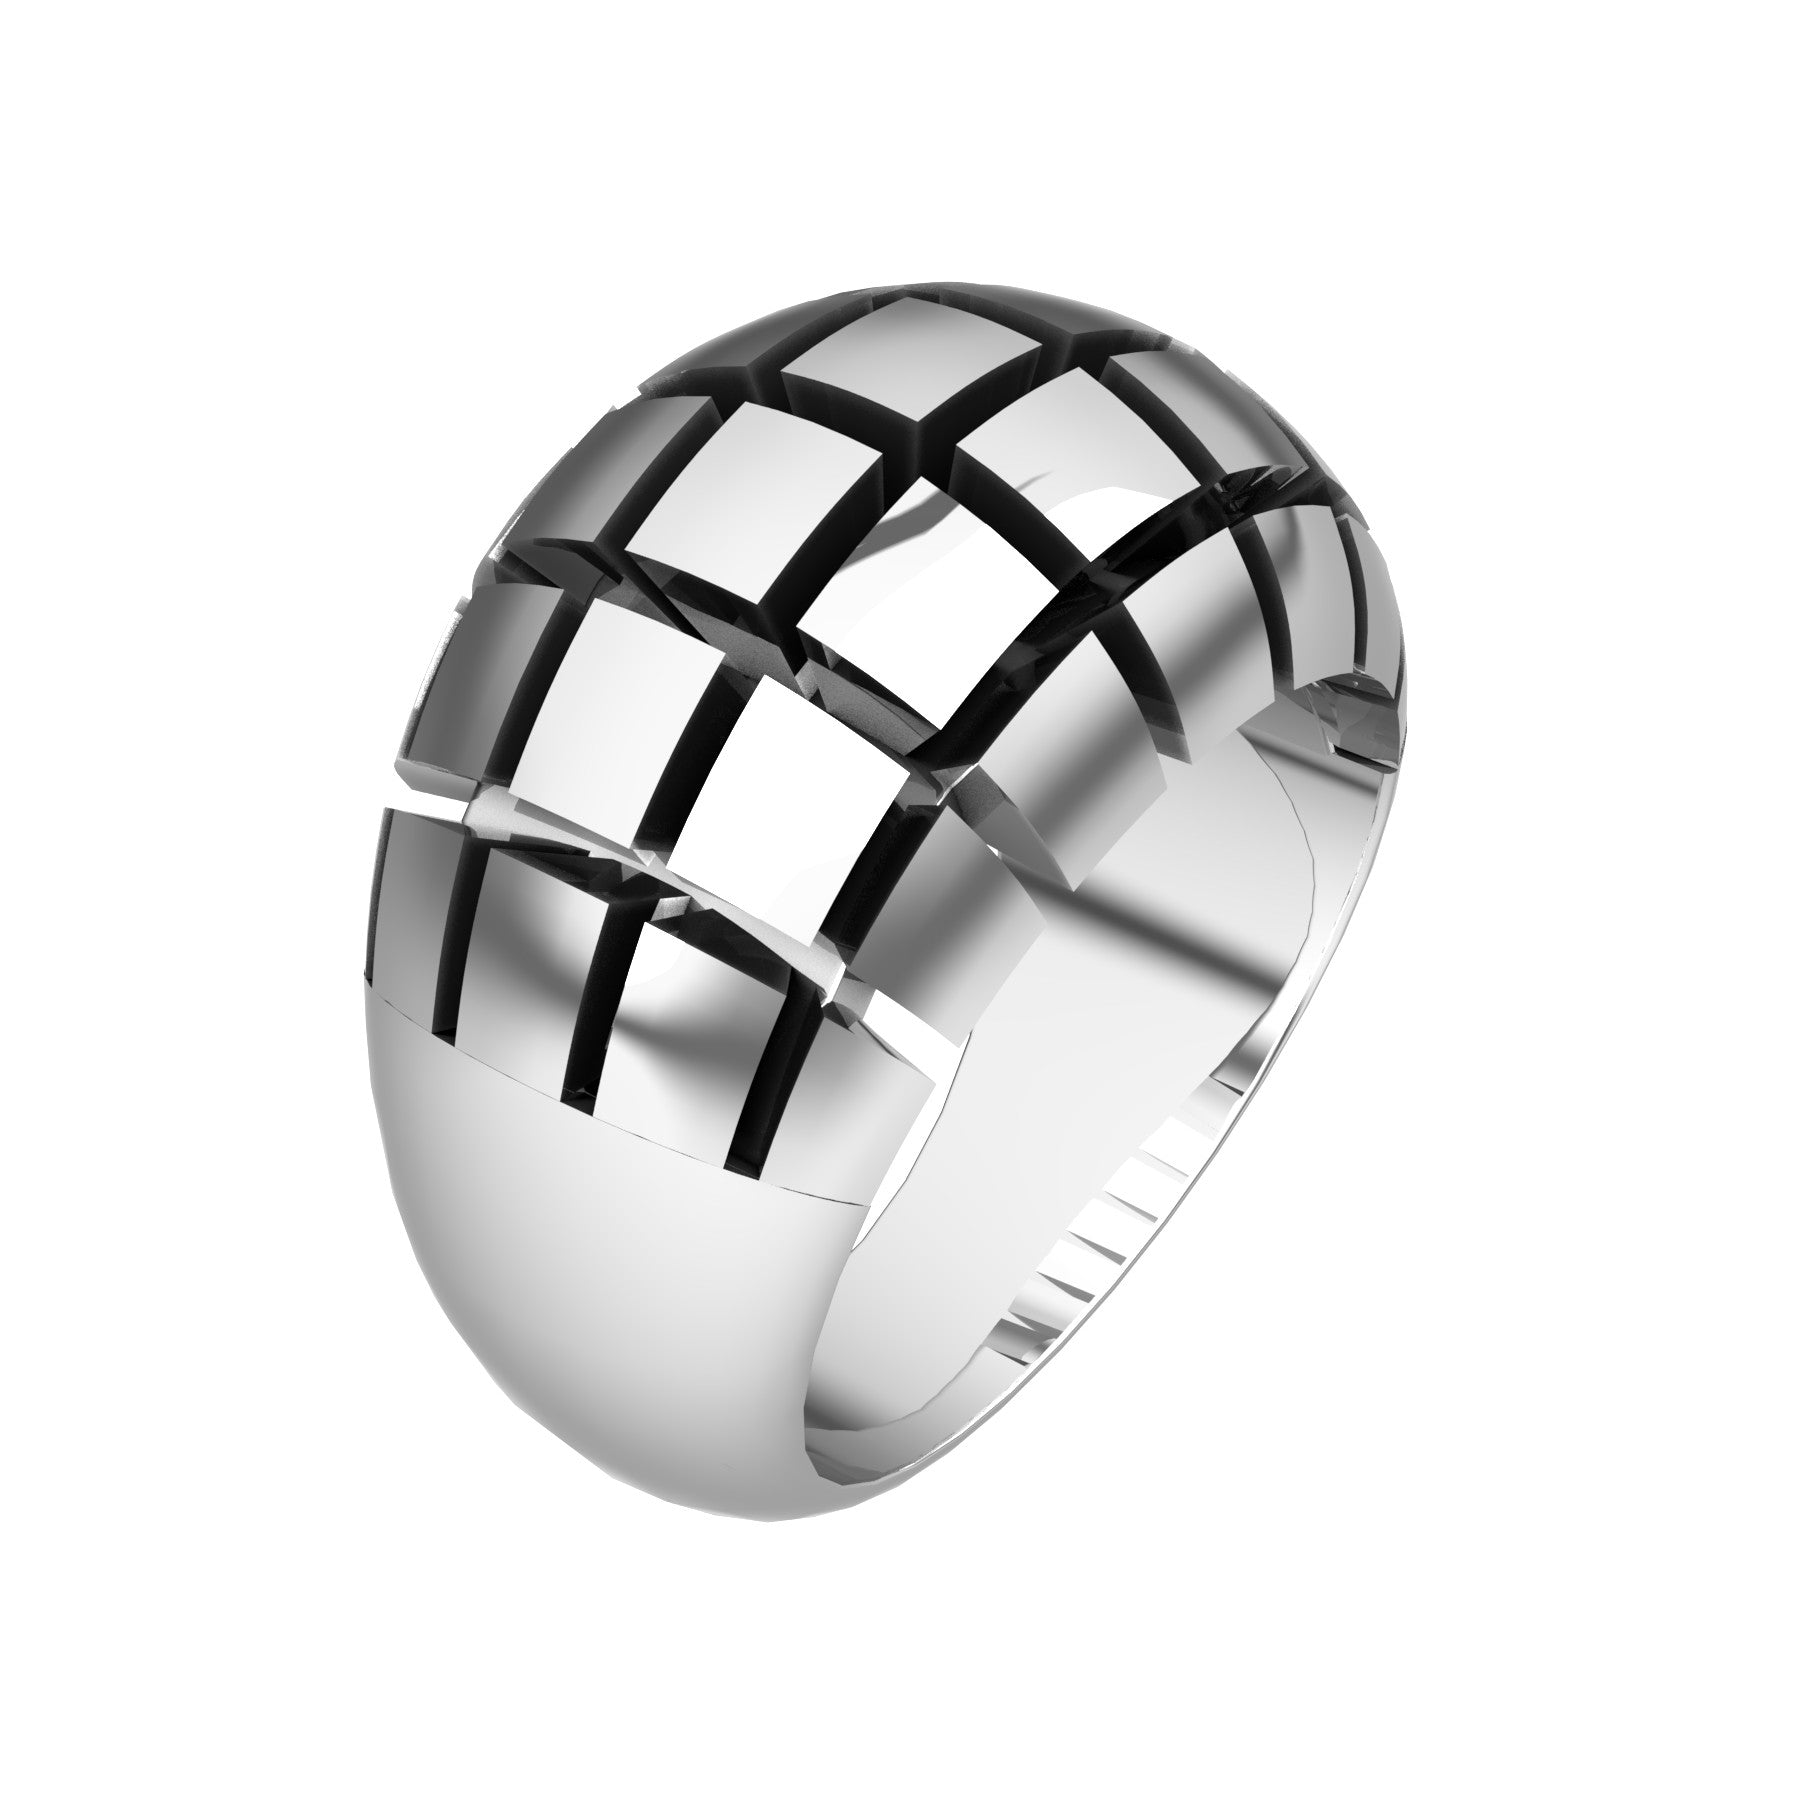 split 5 ring, 18 K white gold, weight about 19,5 g. (0.69 oz), width 13,3 mm max